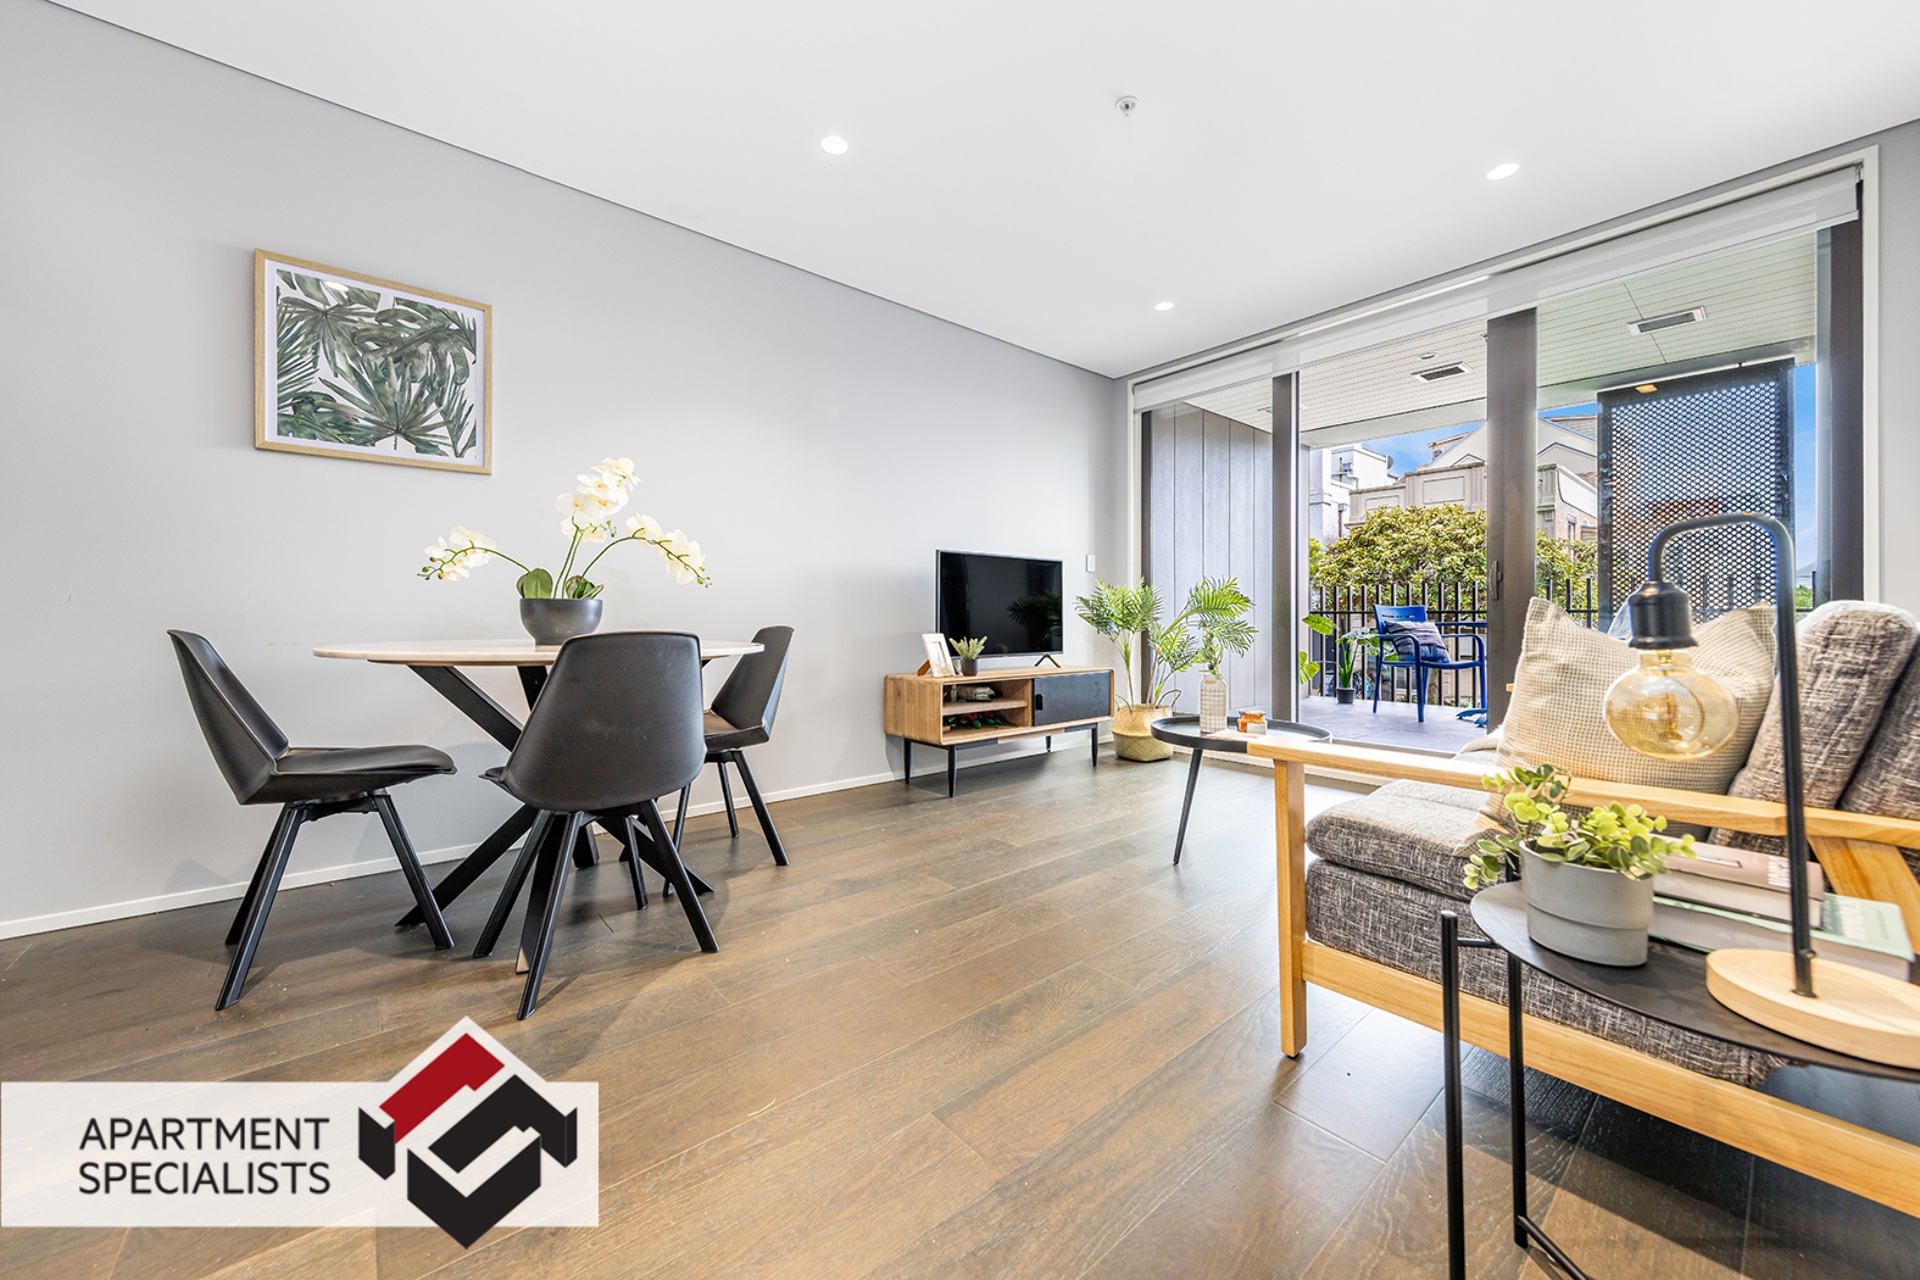 6 | 70 Sale Street, Freemans Bay | Apartment Specialists